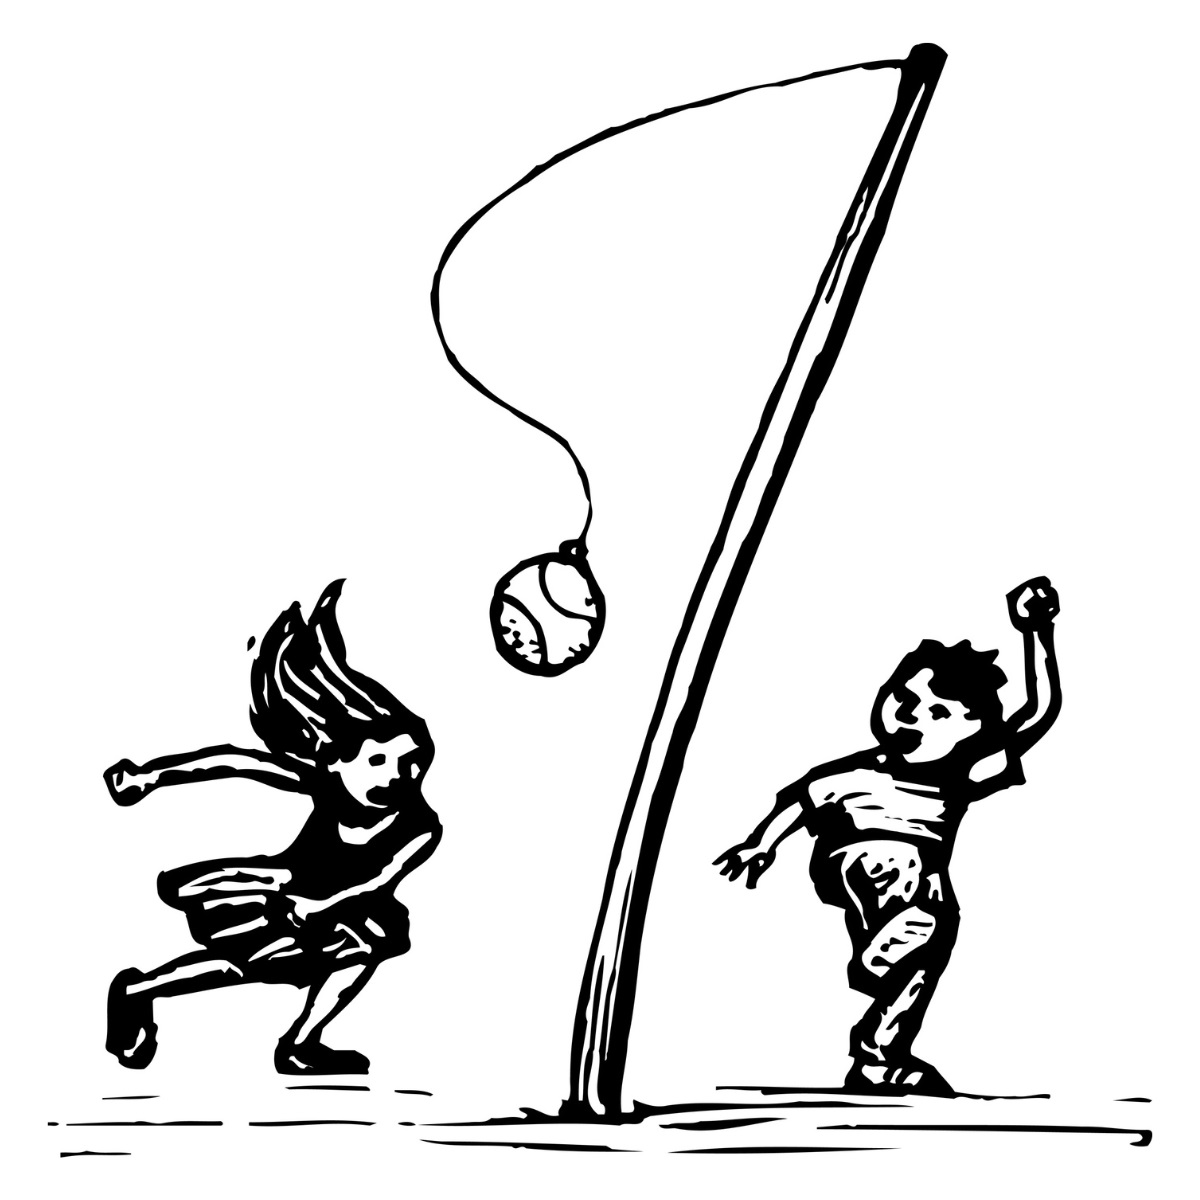 Illustration of a game of tetherball